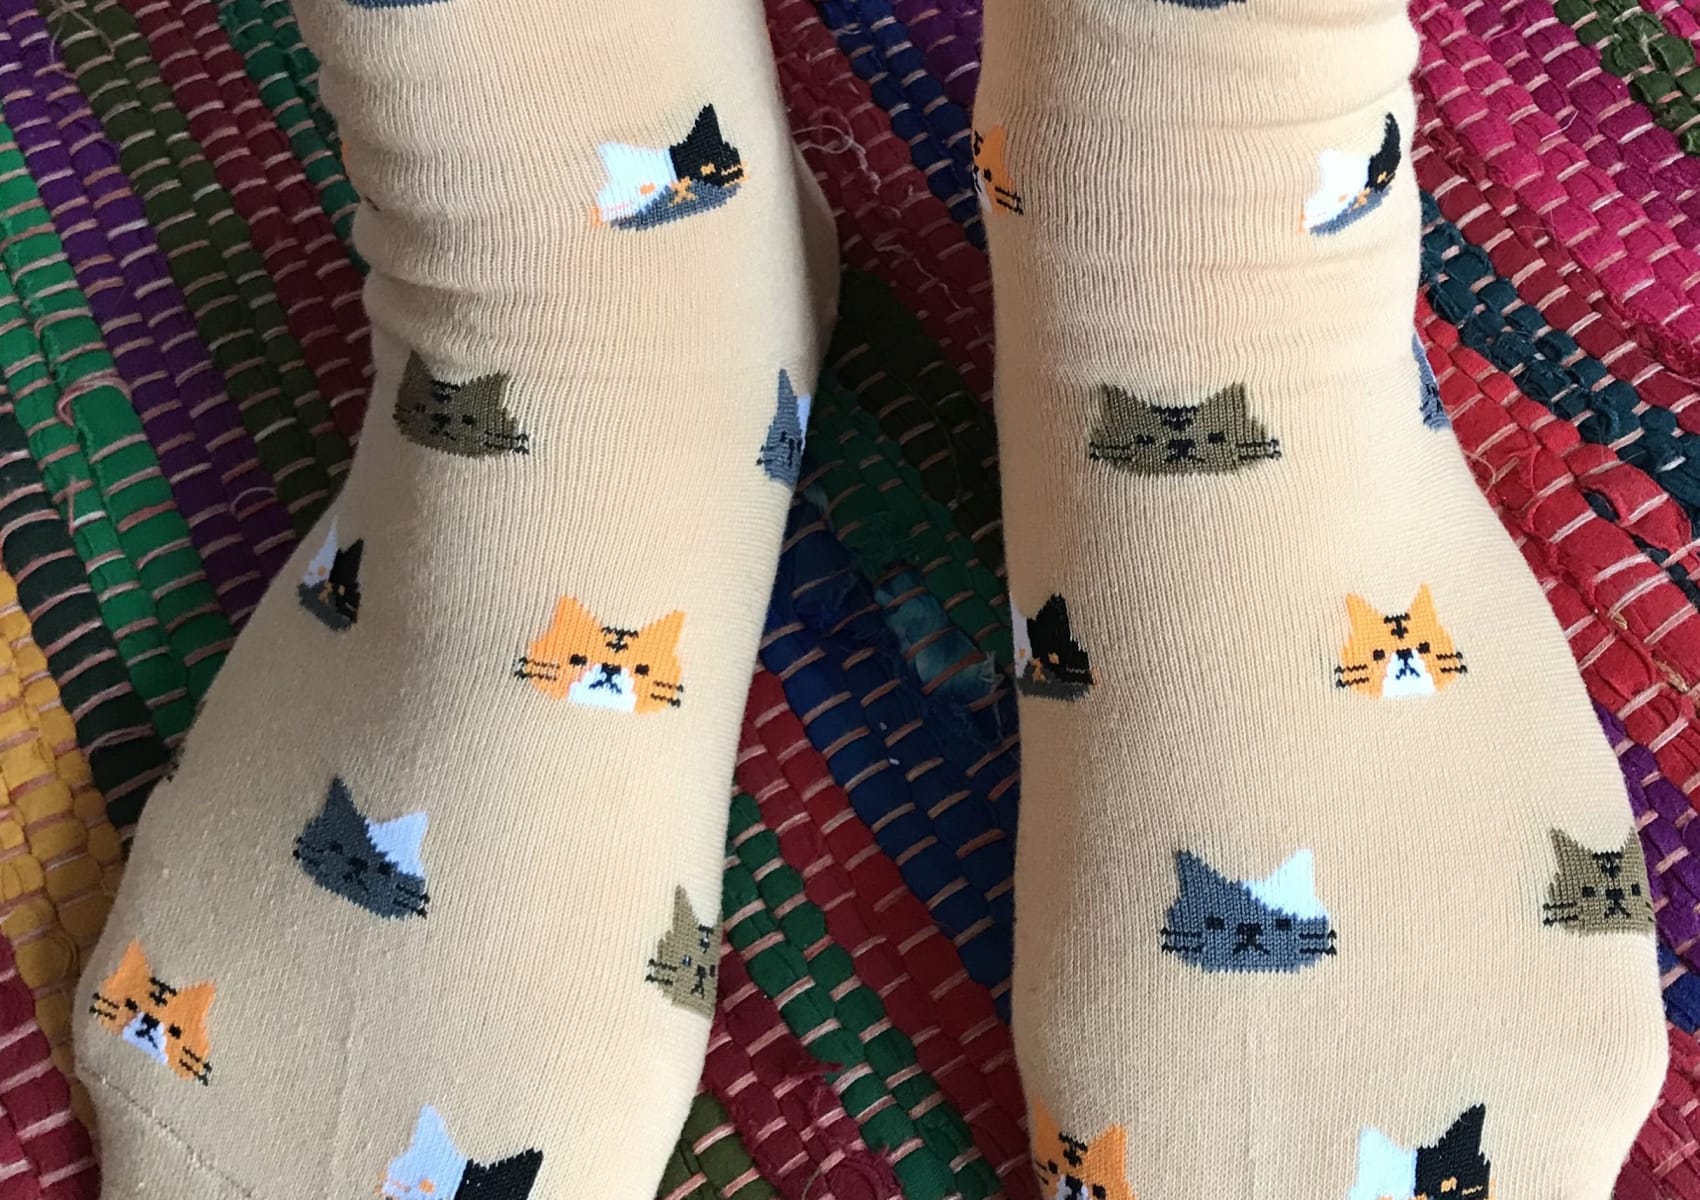 Marmalade ladies' short sock with cat heads